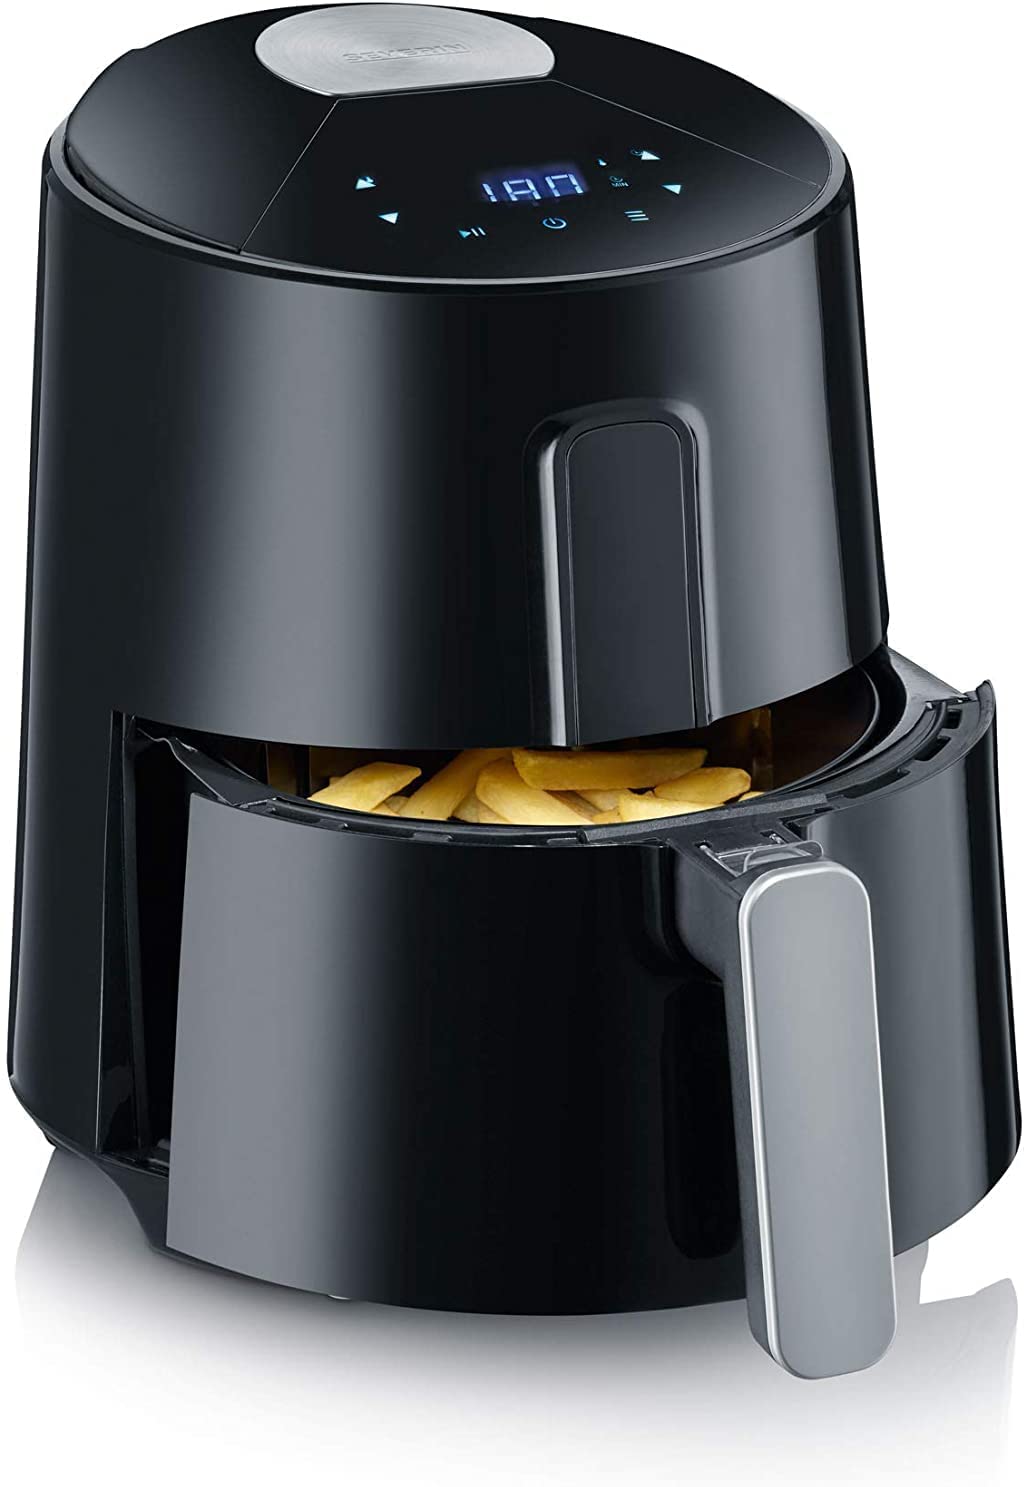 Severin FR 2465 Hot Air Fryer 2.6 Litres with 8 Cooking Programs without Oil or 60 Minute Timer